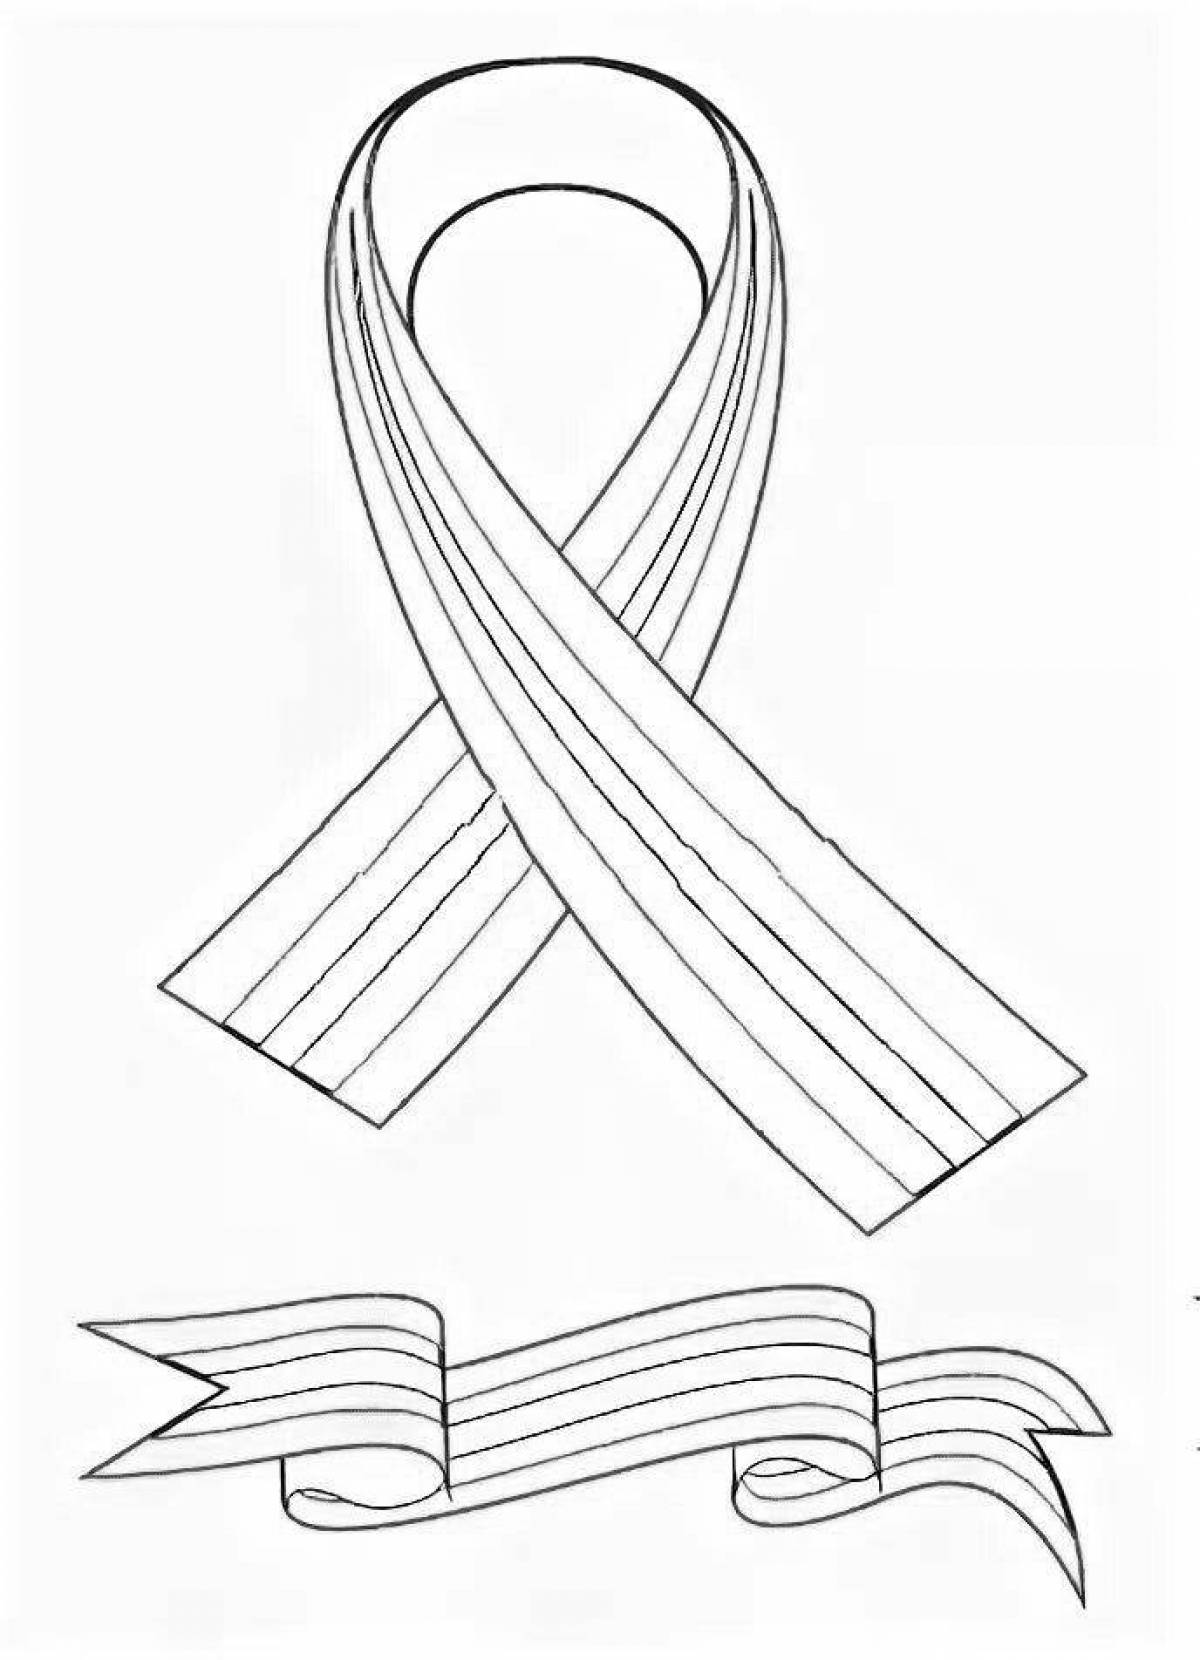 Attractive drawing of St. George ribbon